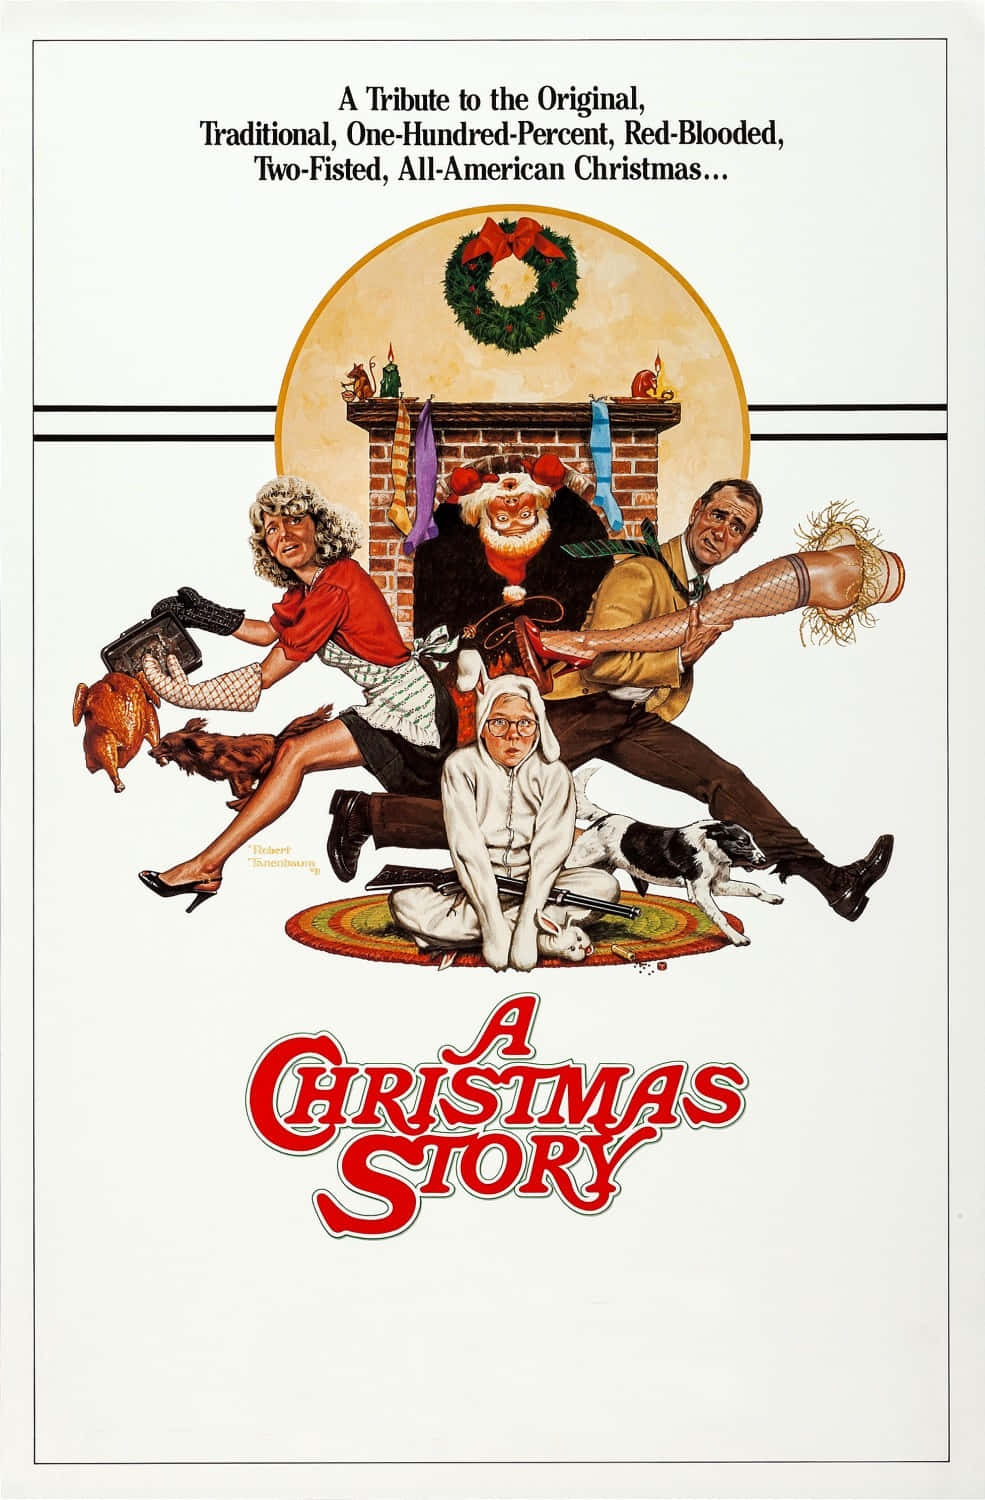 "The Classic Christmas Movie 'A Christmas Story'" Wallpaper